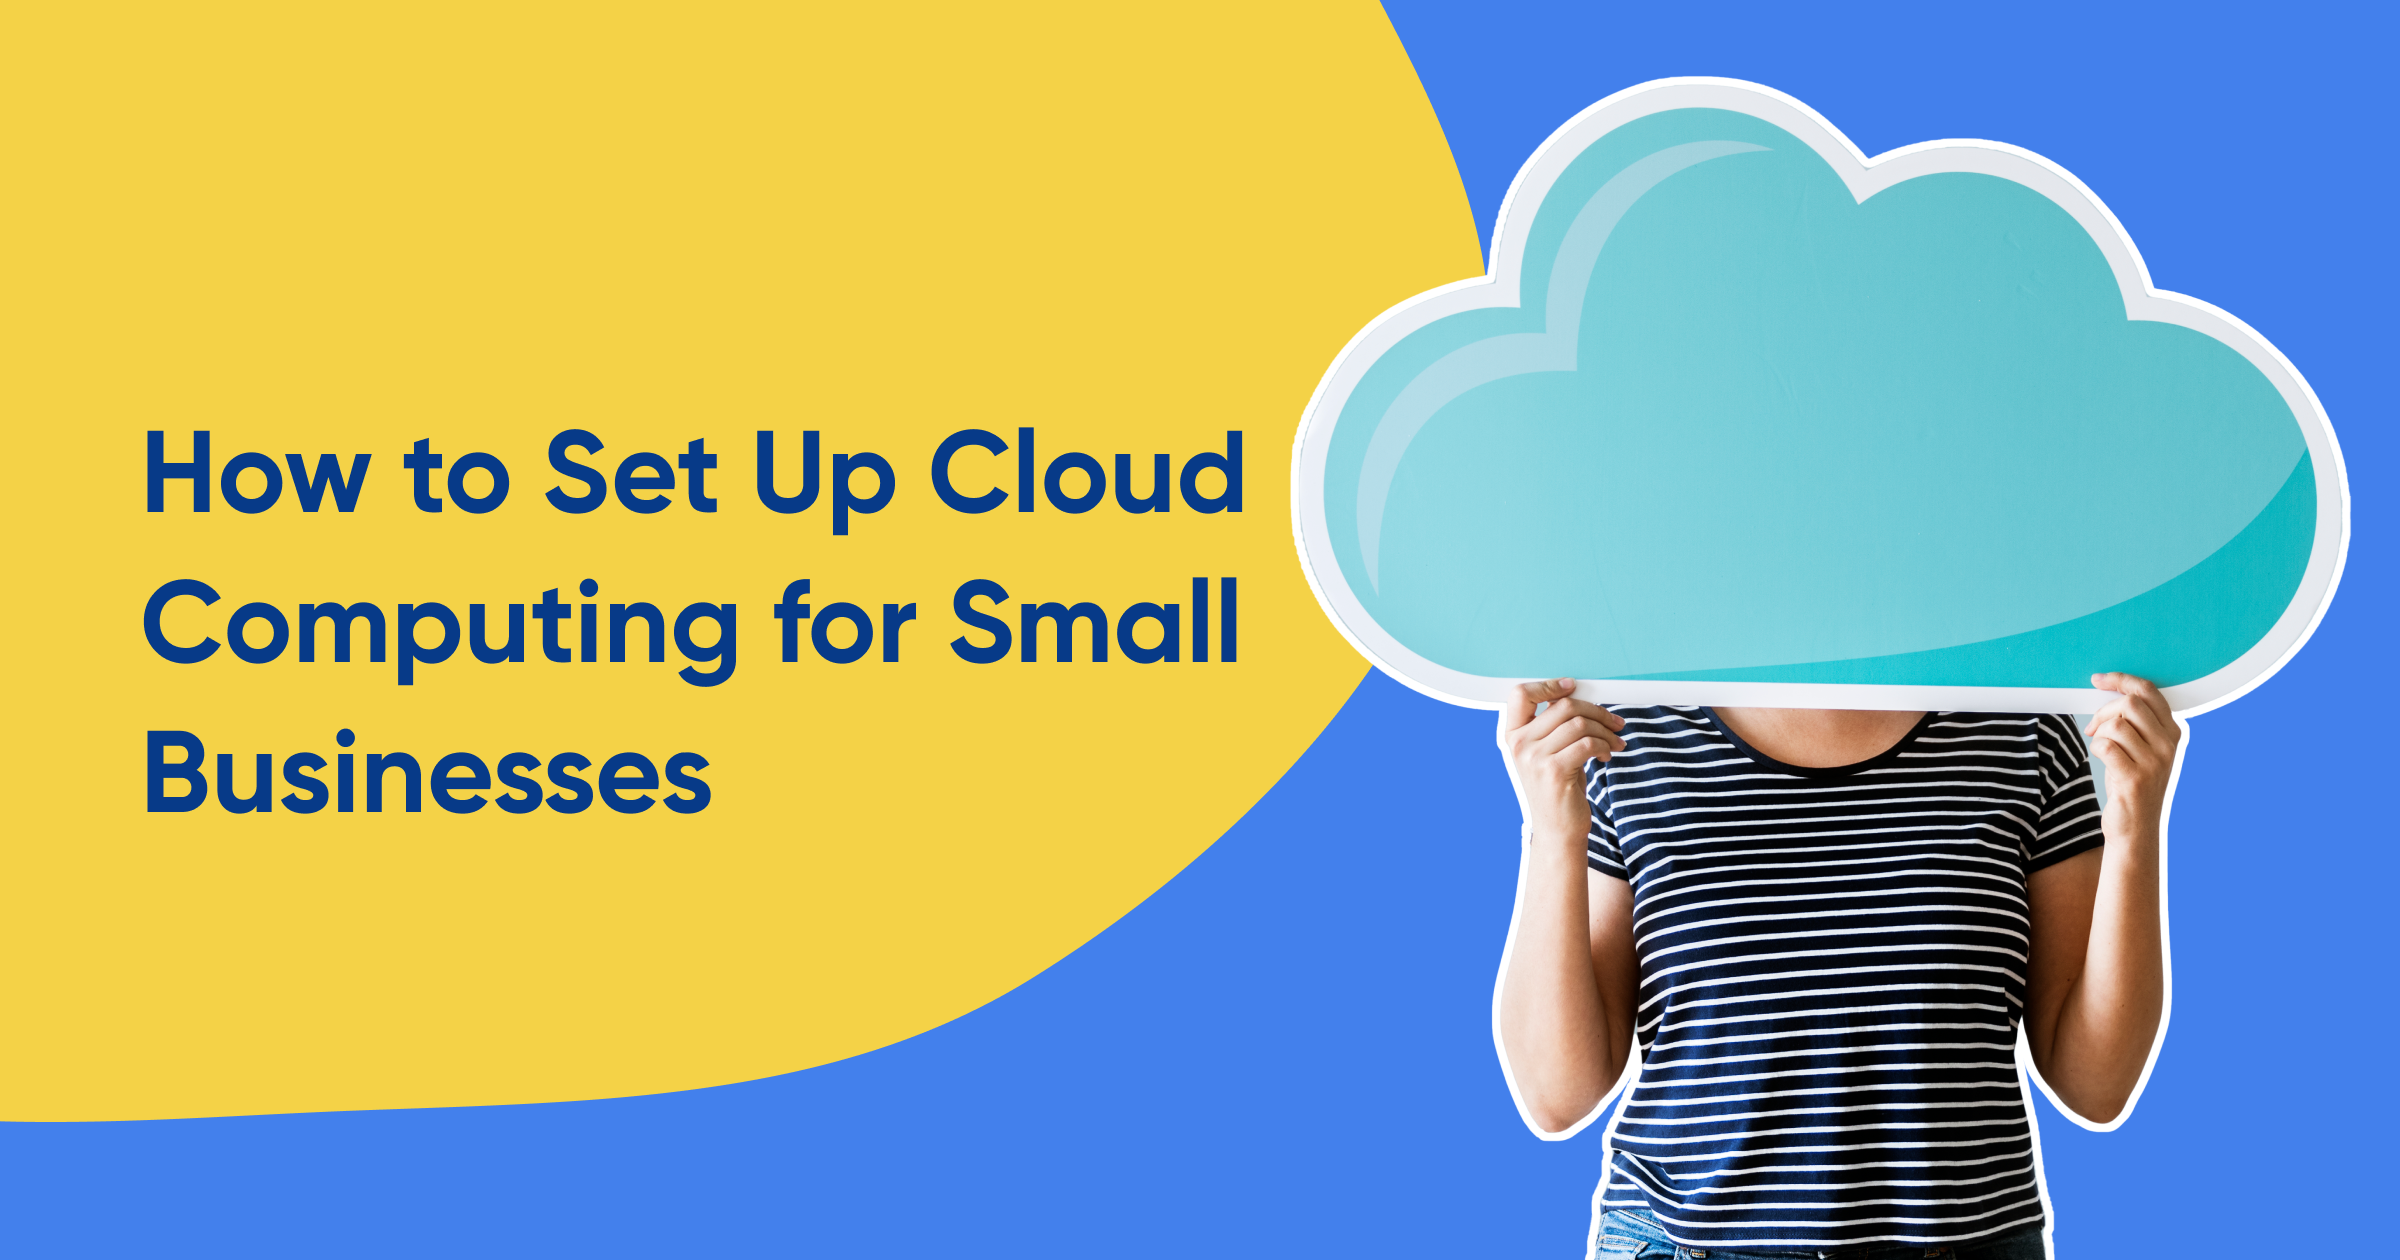 How to Set Up Cloud Computing for Small Businesses